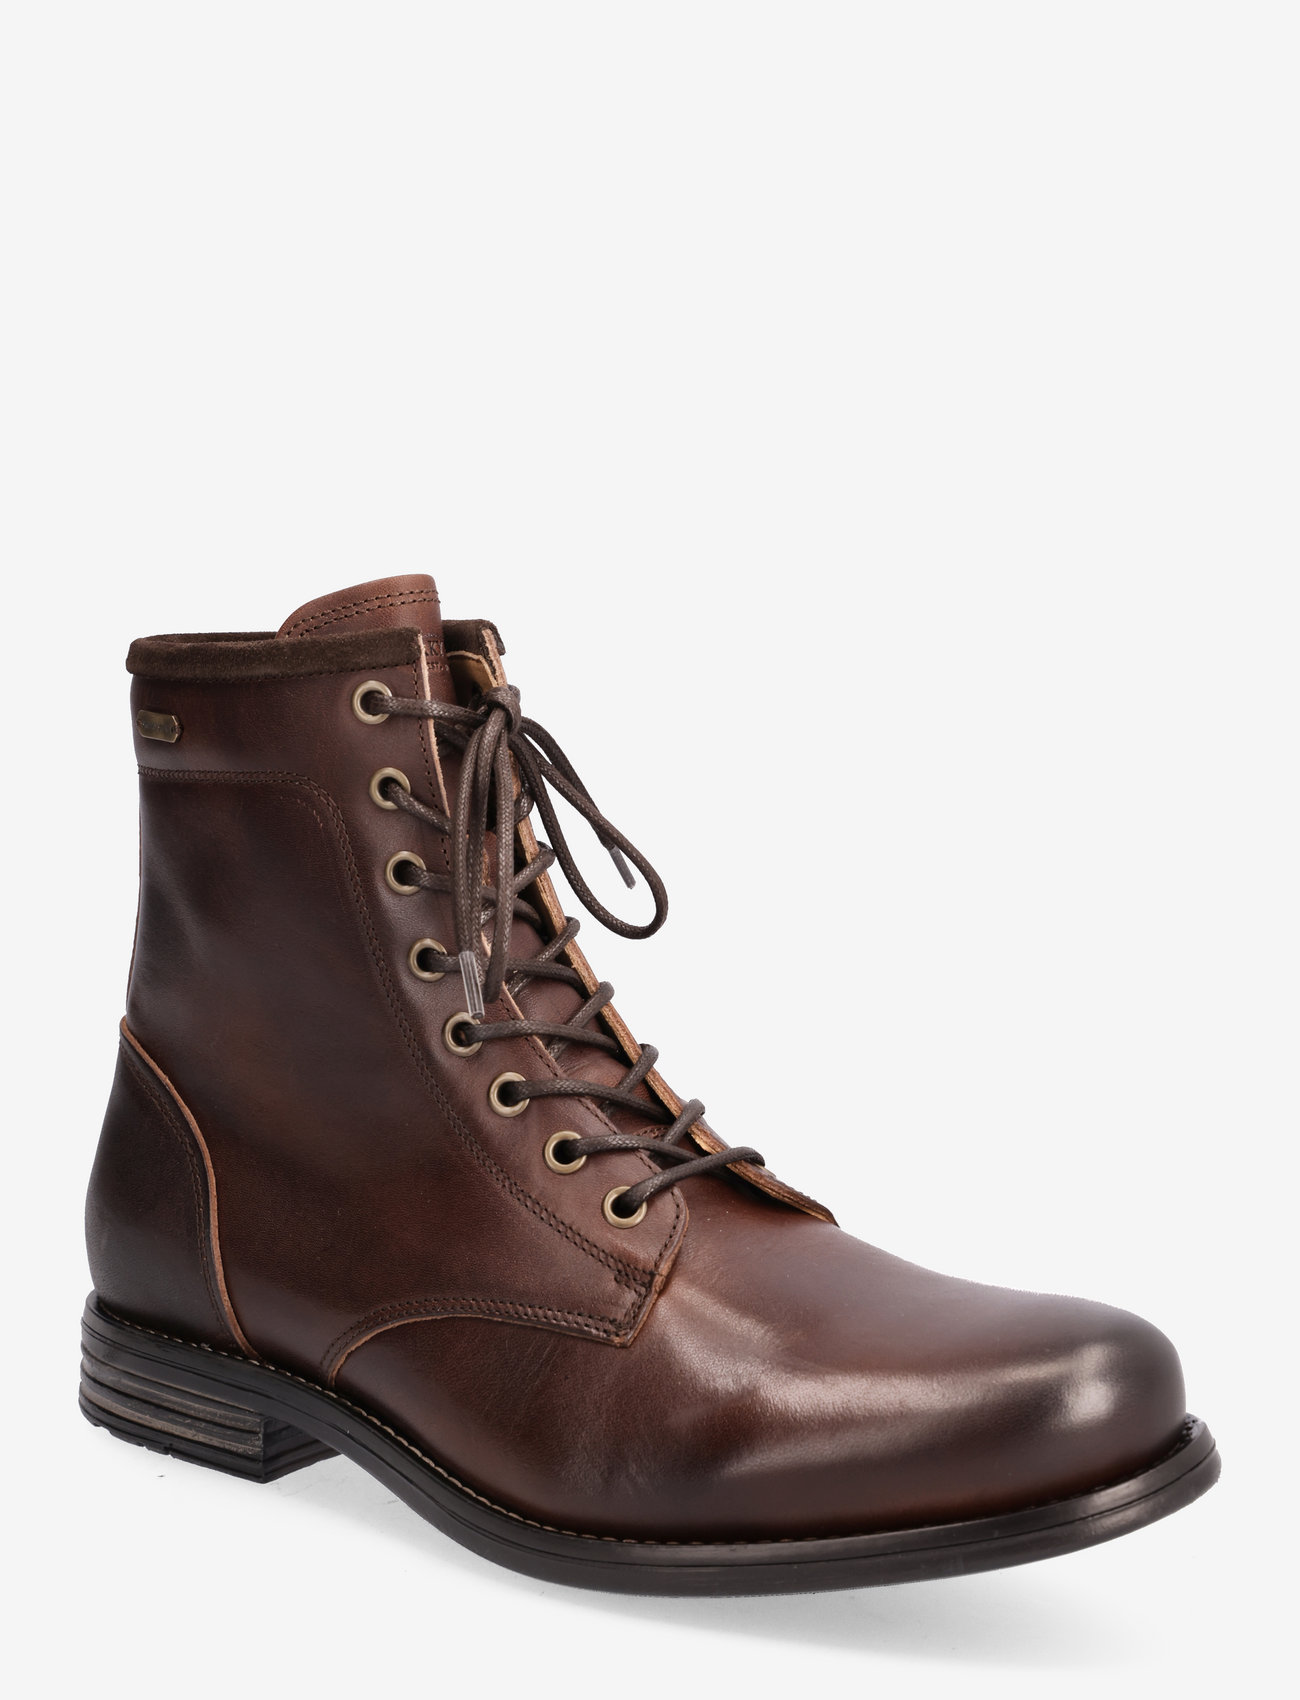 Sneaky Steve - Nicco Leather Shoe - lace ups - brown - 0